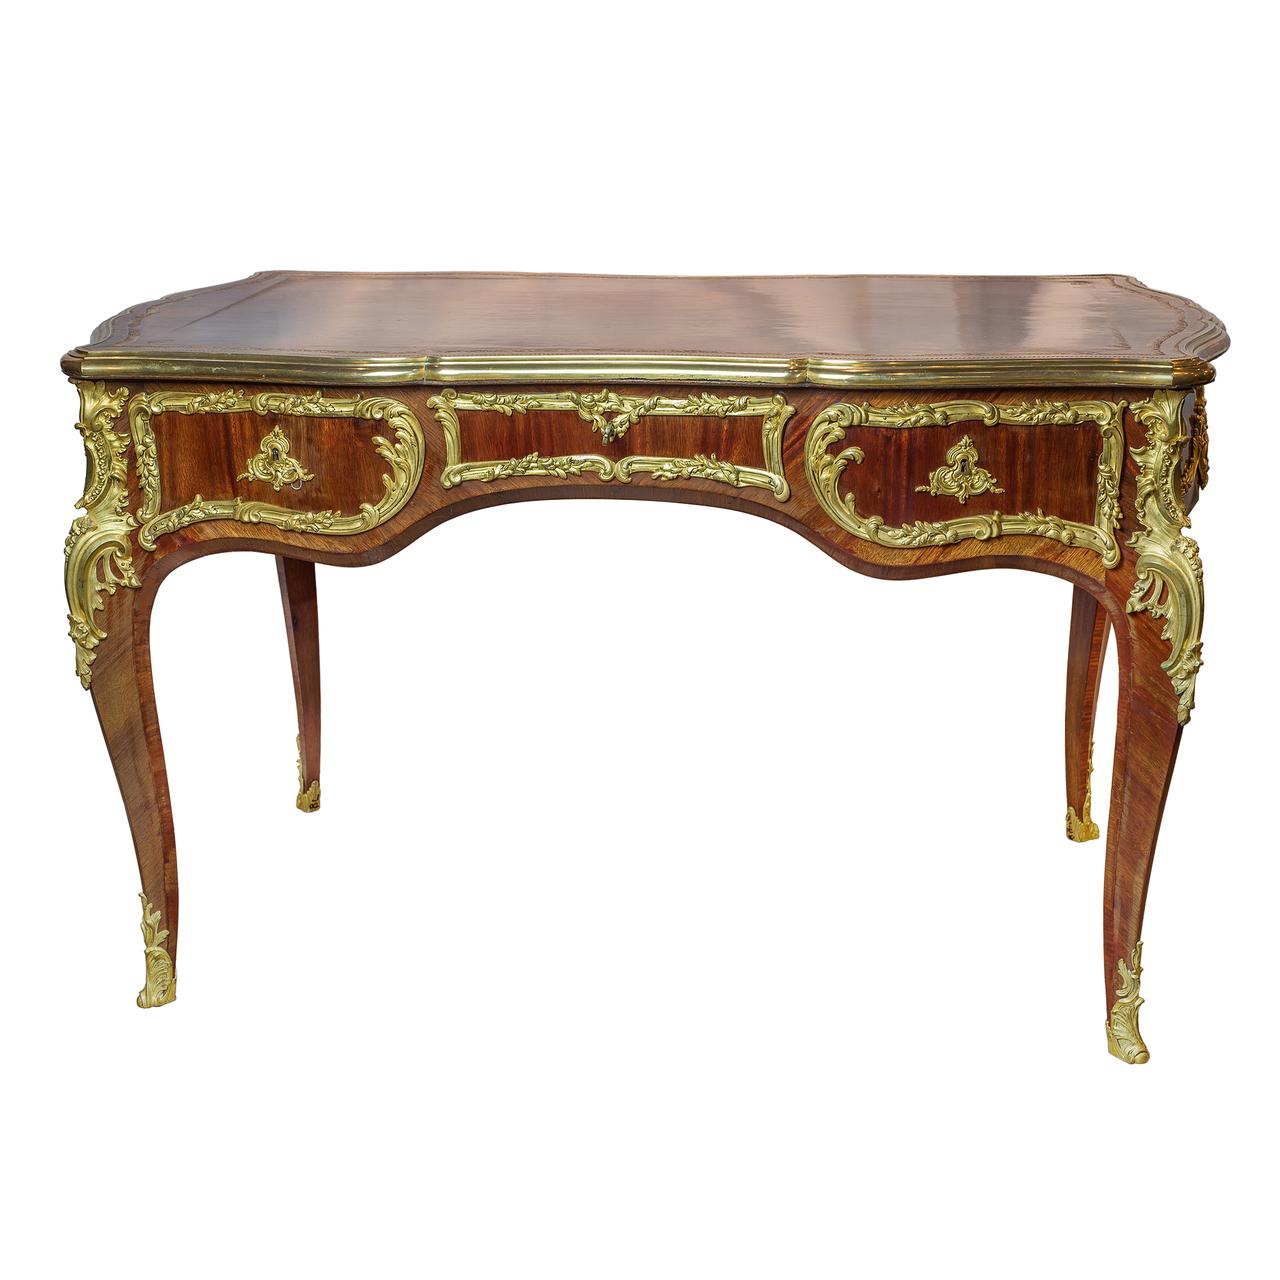 An exquisite quality French Louis XV style gilt bronze mounted tulipwood and kingwood bureau plat attributed to Joseph-Emmanuel Zwiener

Attributed to Joseph-Emmanuel Zwiener (1848-1895)
Date: 19th century
Origin: French
Dimension: H 29 3/4 in.